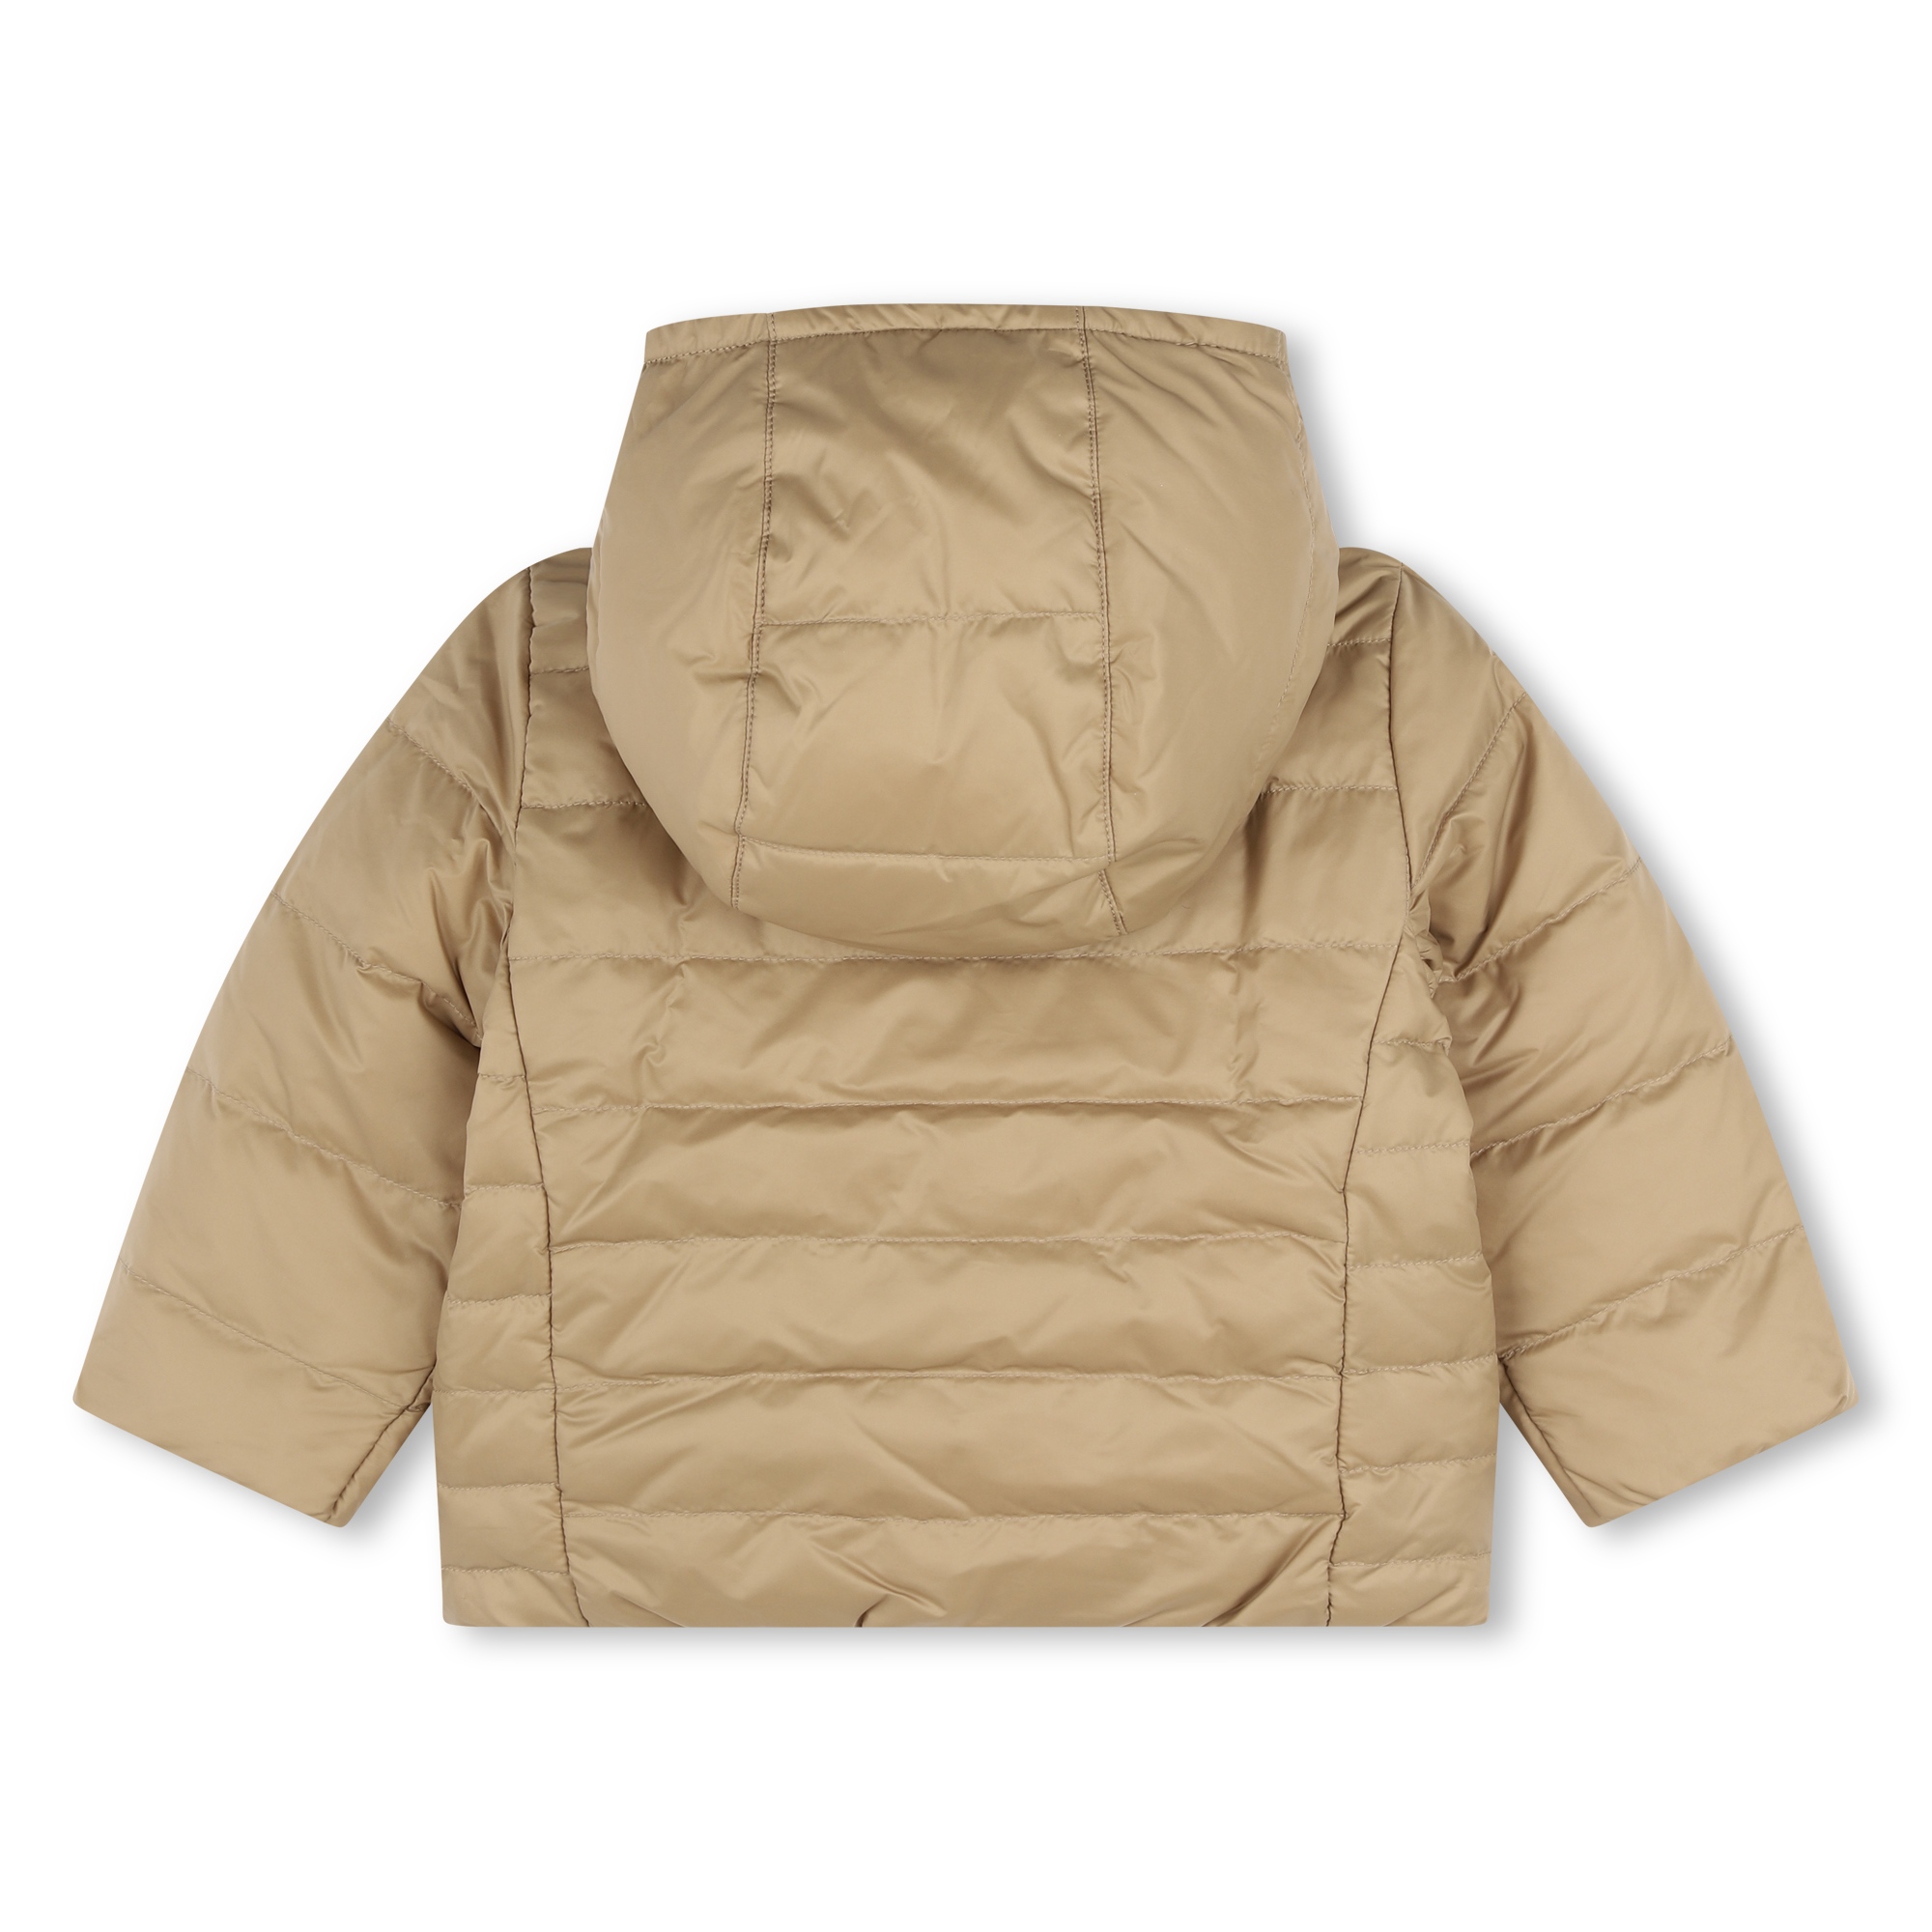 Water-repellent hooded jacket BOSS for BOY